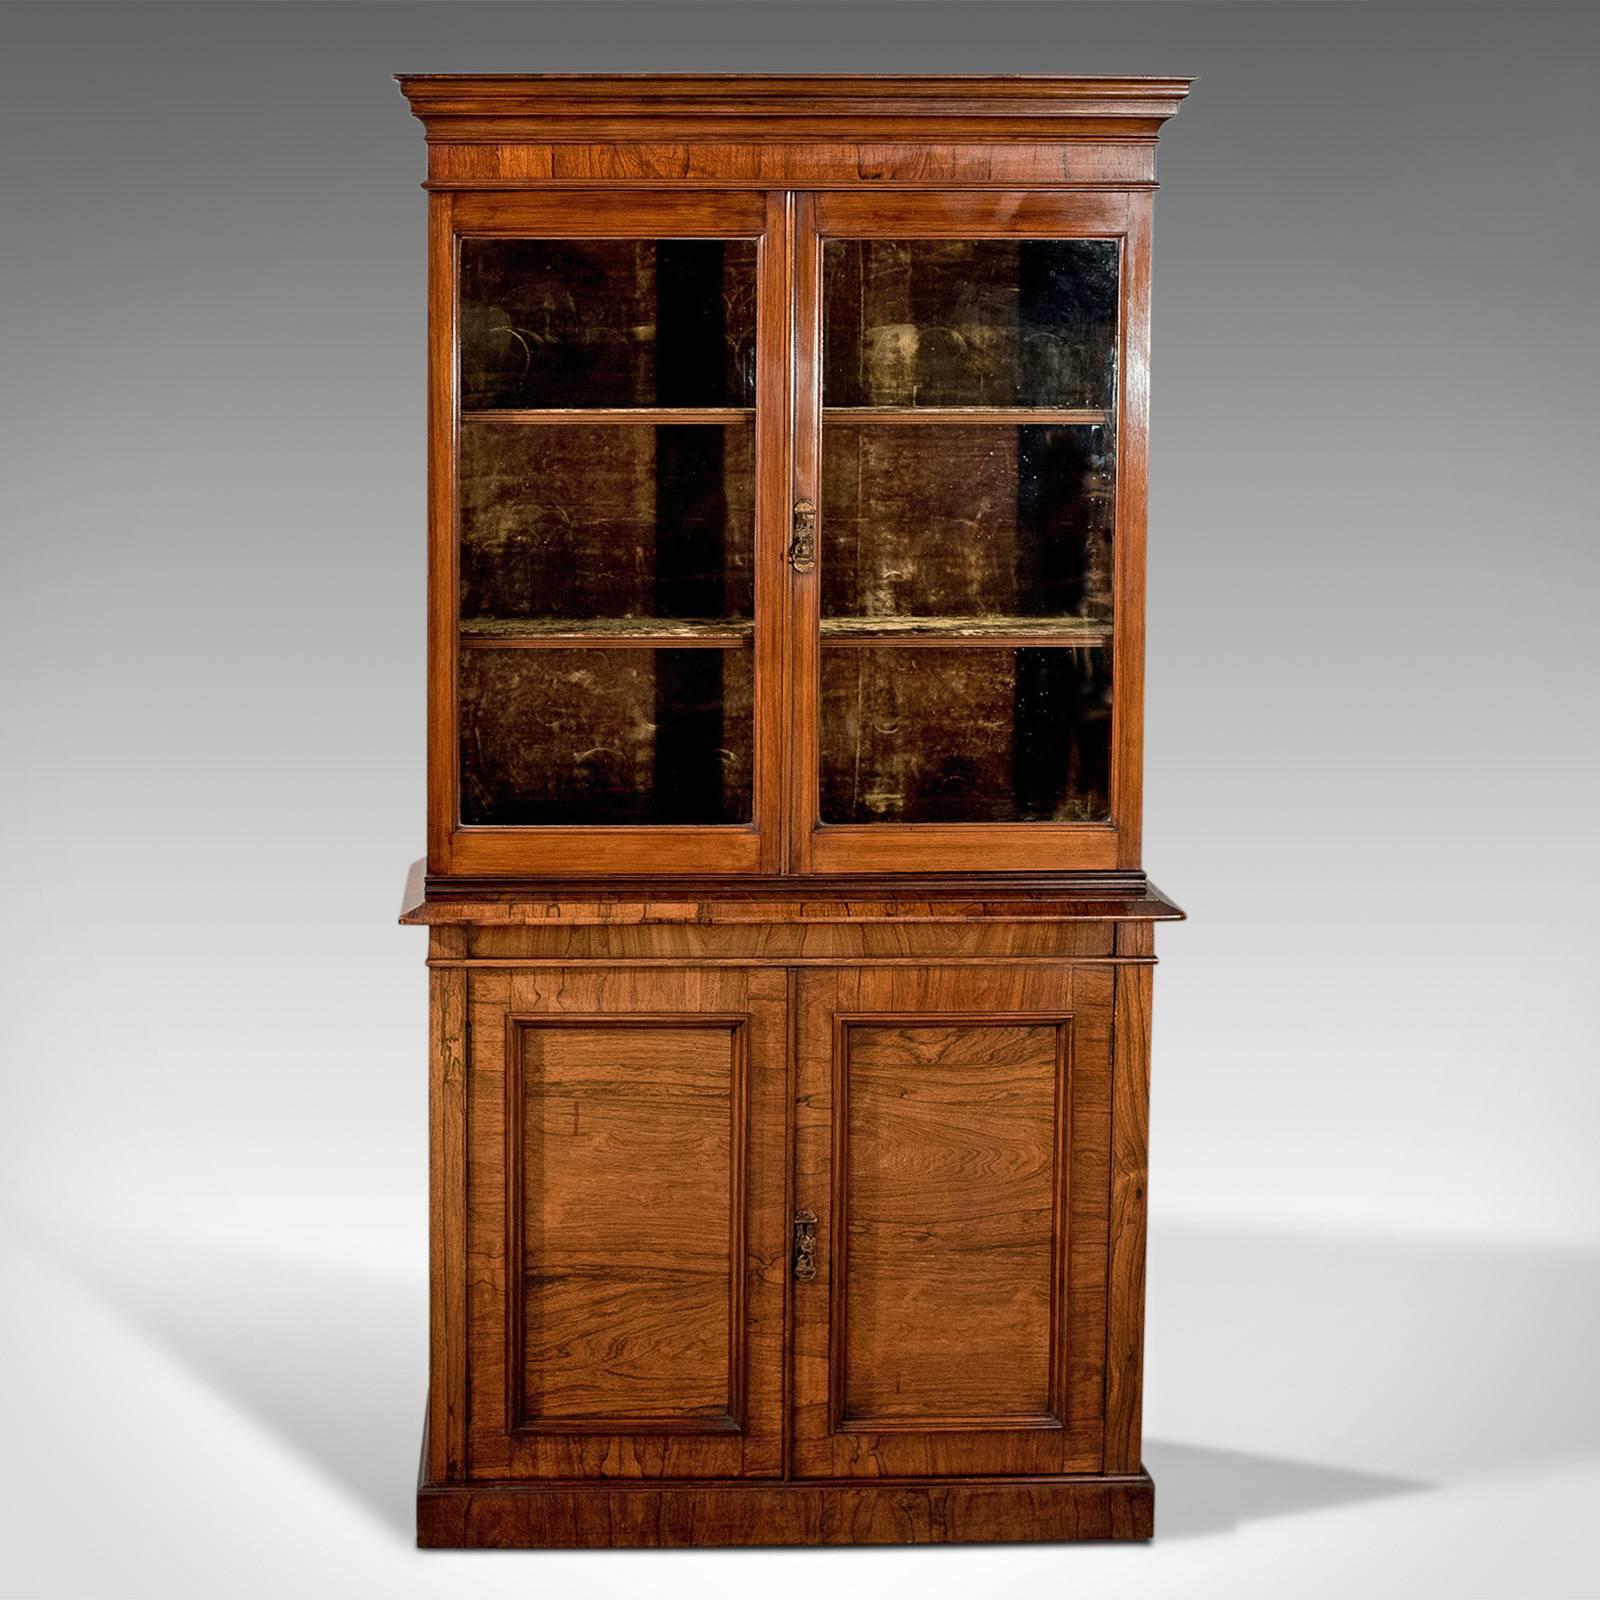 This is an antique display cabinet, a tall, Victorian, bookcase dating to circa 1900.

Stunning, well figured in a very desirable pallet
Desirable aged patina in a wax polished finish
Luxurious velvet lining to the upper cabinet display area

With